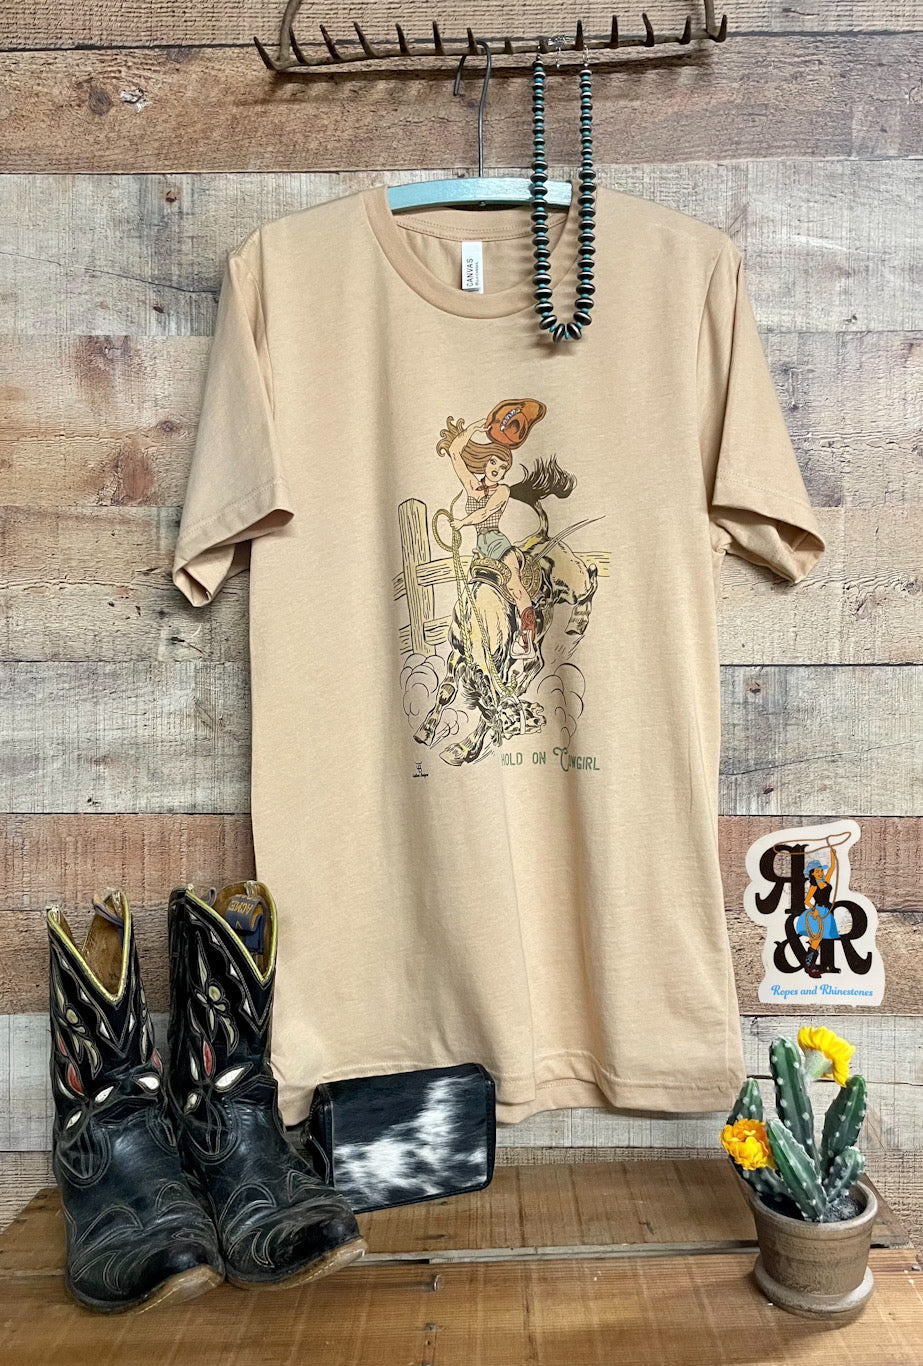 Hold On Cowgirl Tee